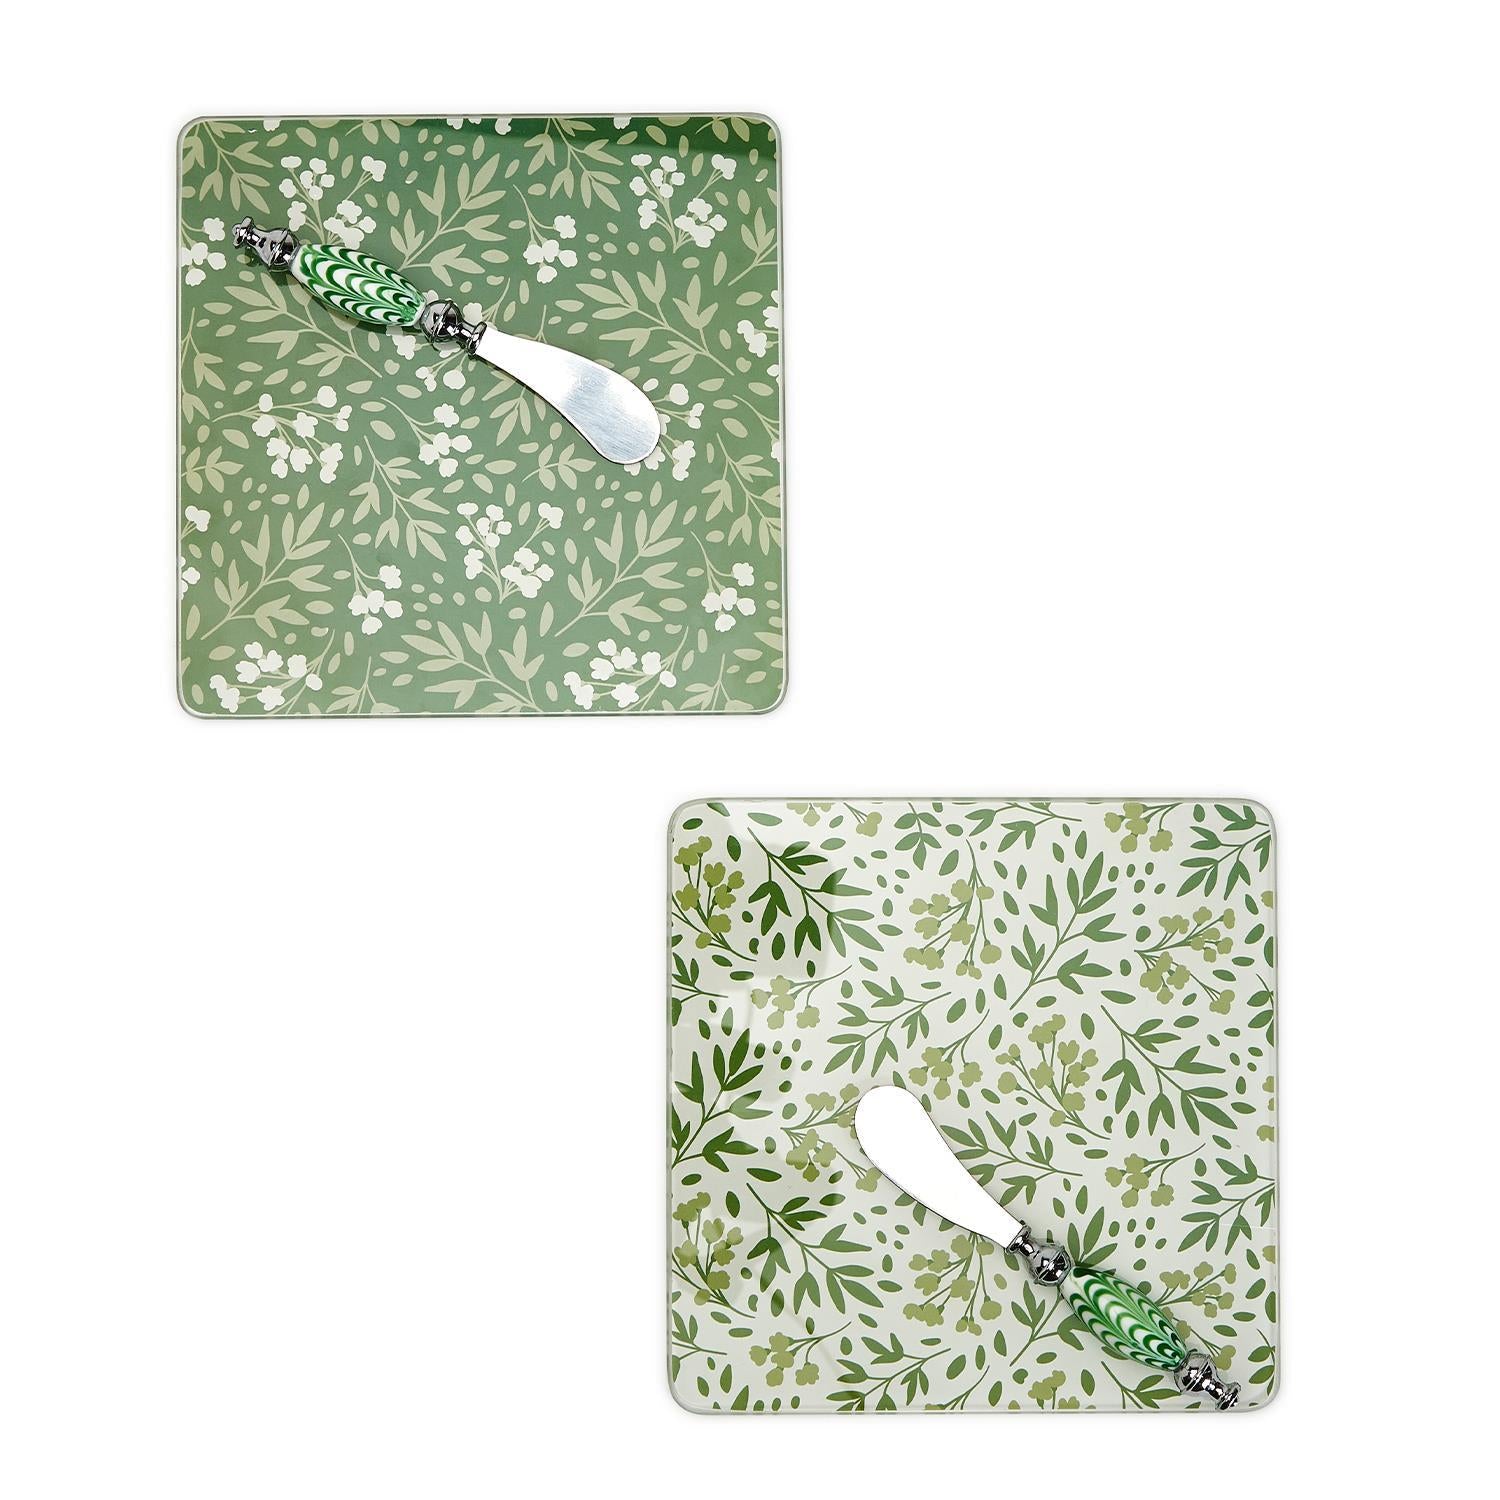 Countryside 2 Pc Cheese Serving Set in Gift Box